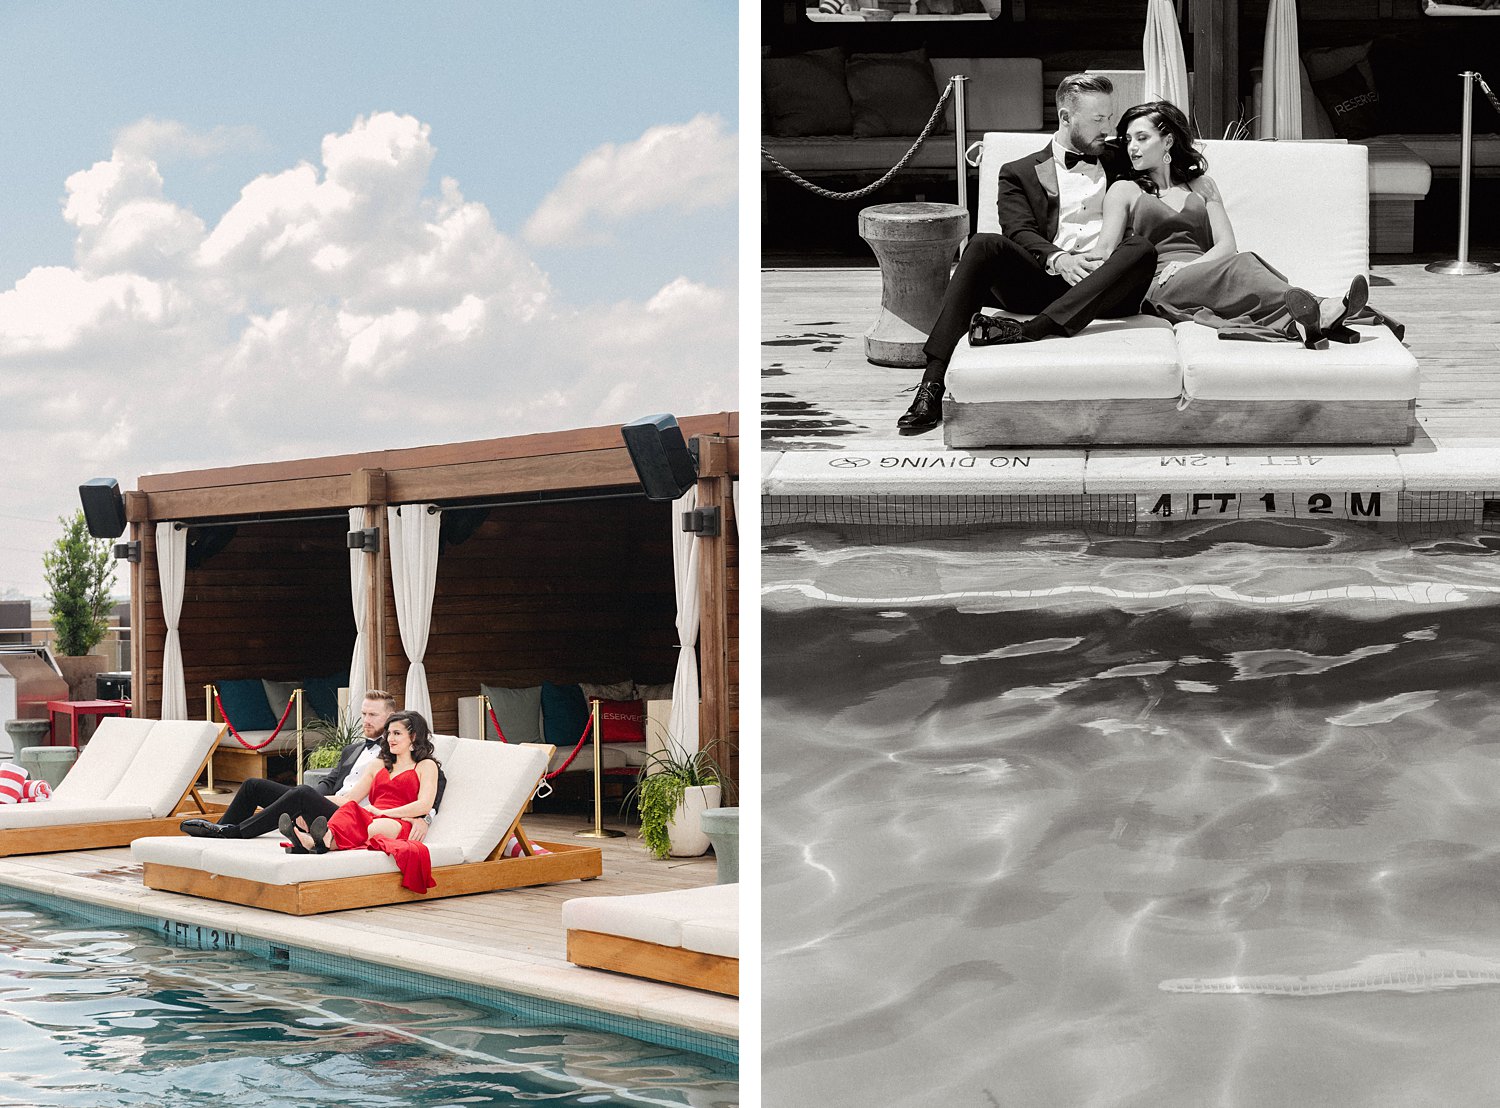 Woman in Dress sitting with man in black tuxedo on white pooldeck sofa at Virgin Dallas Hotel